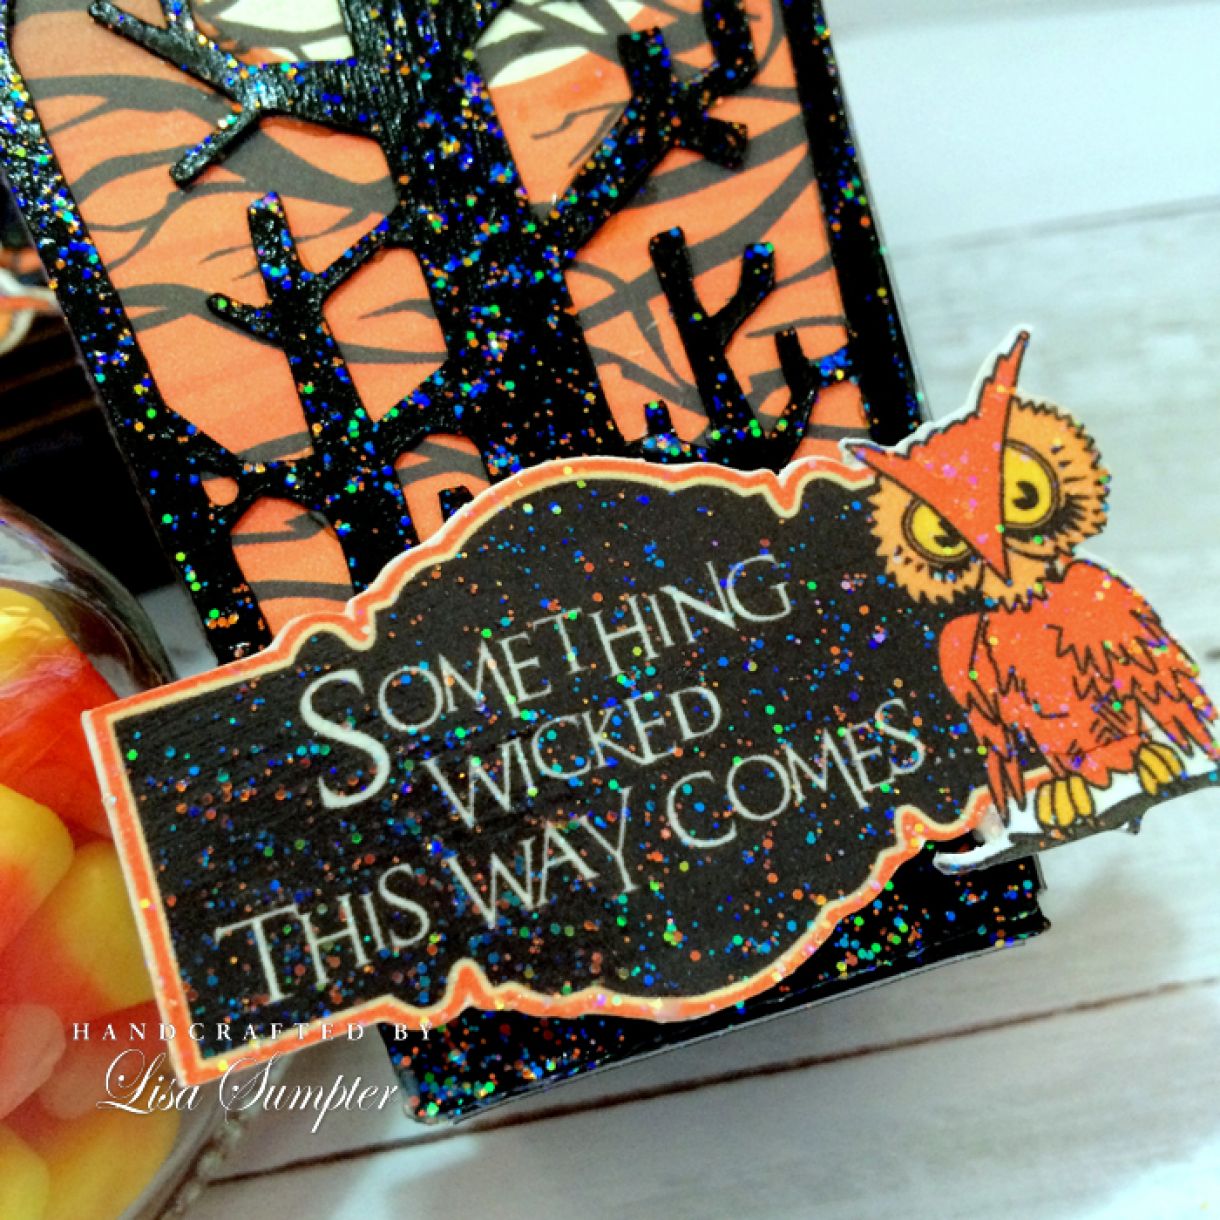 Lisa  Sumpter  Candy  Corn  Coffins 3